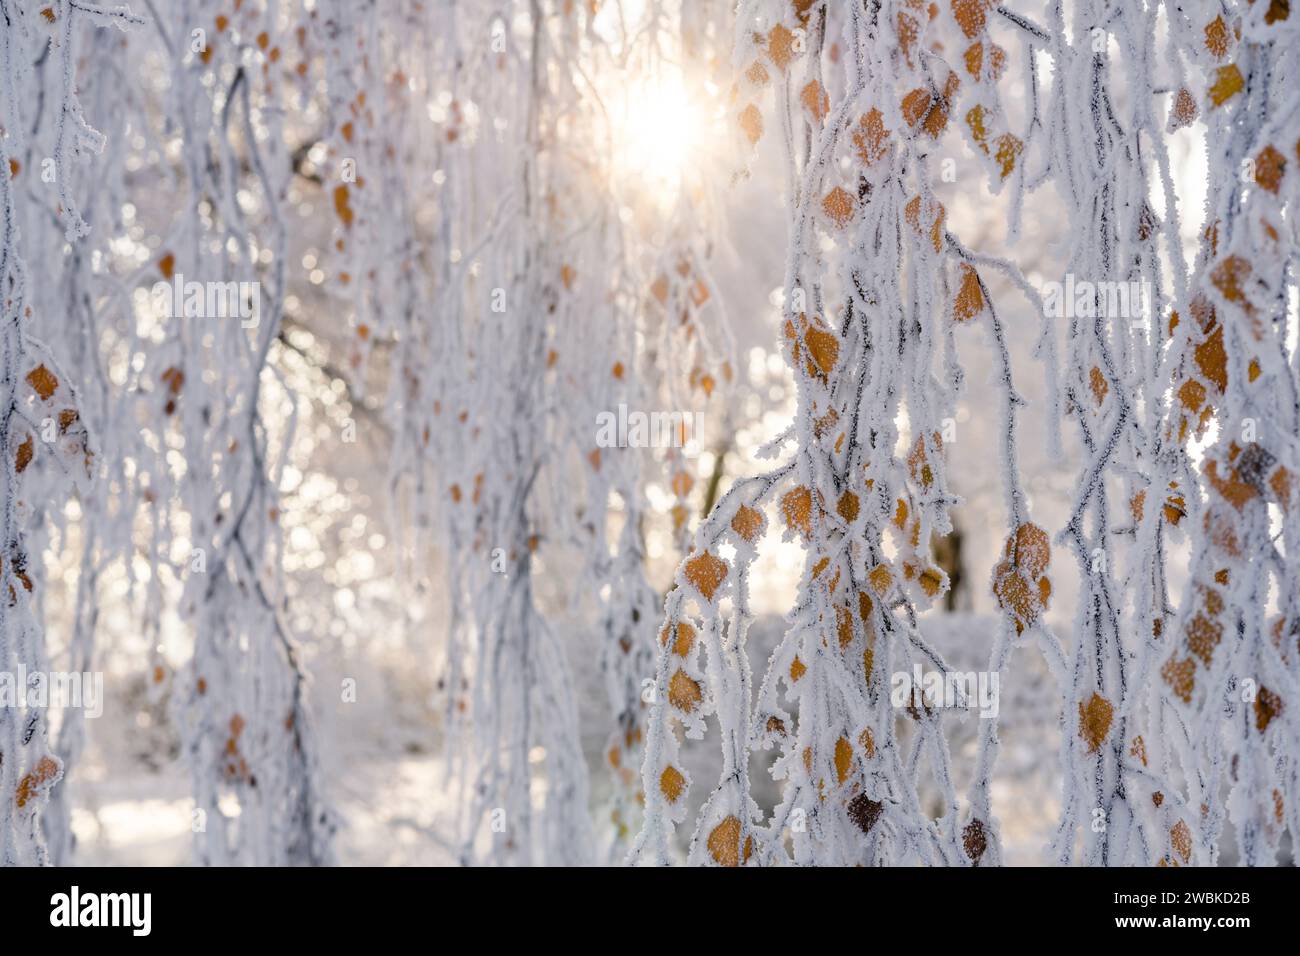 Winter atmosphere, the discolored leaves of the birch are covered with frost and ice crystals on a freezing cold morning, the rising sun shines through the branches Stock Photo